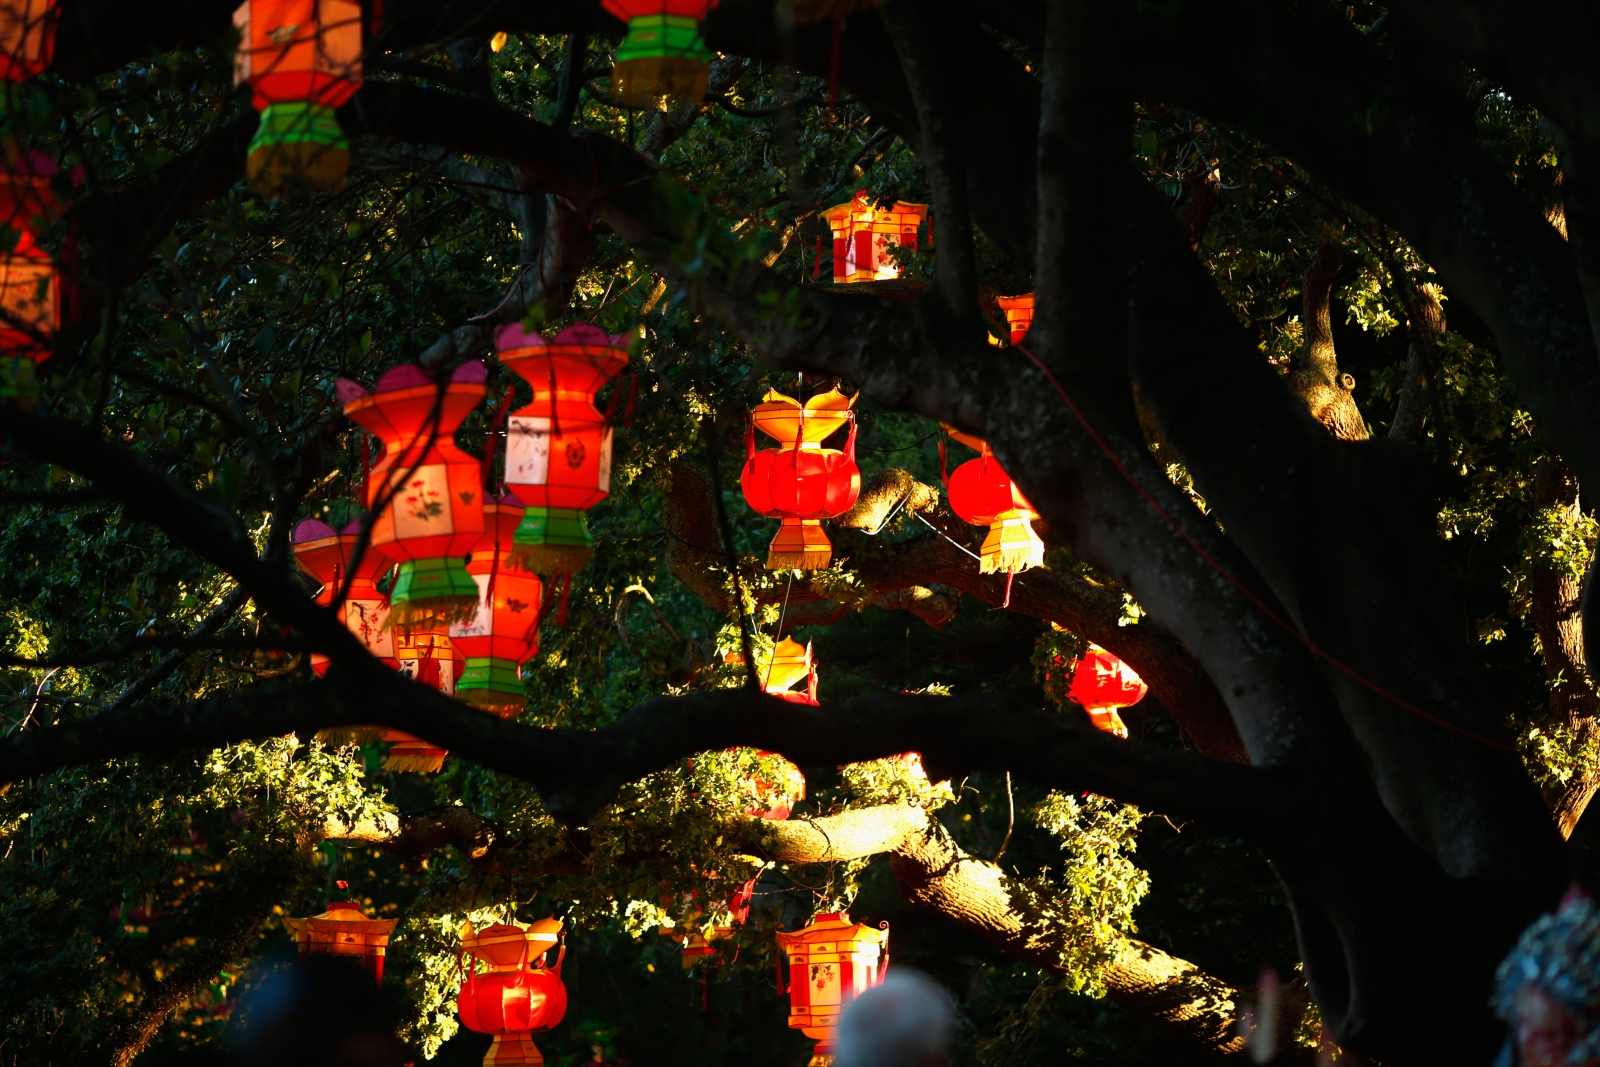 Lantern Festival: History and origins of the 2,200-year-old Chinese celebration1600 x 1067